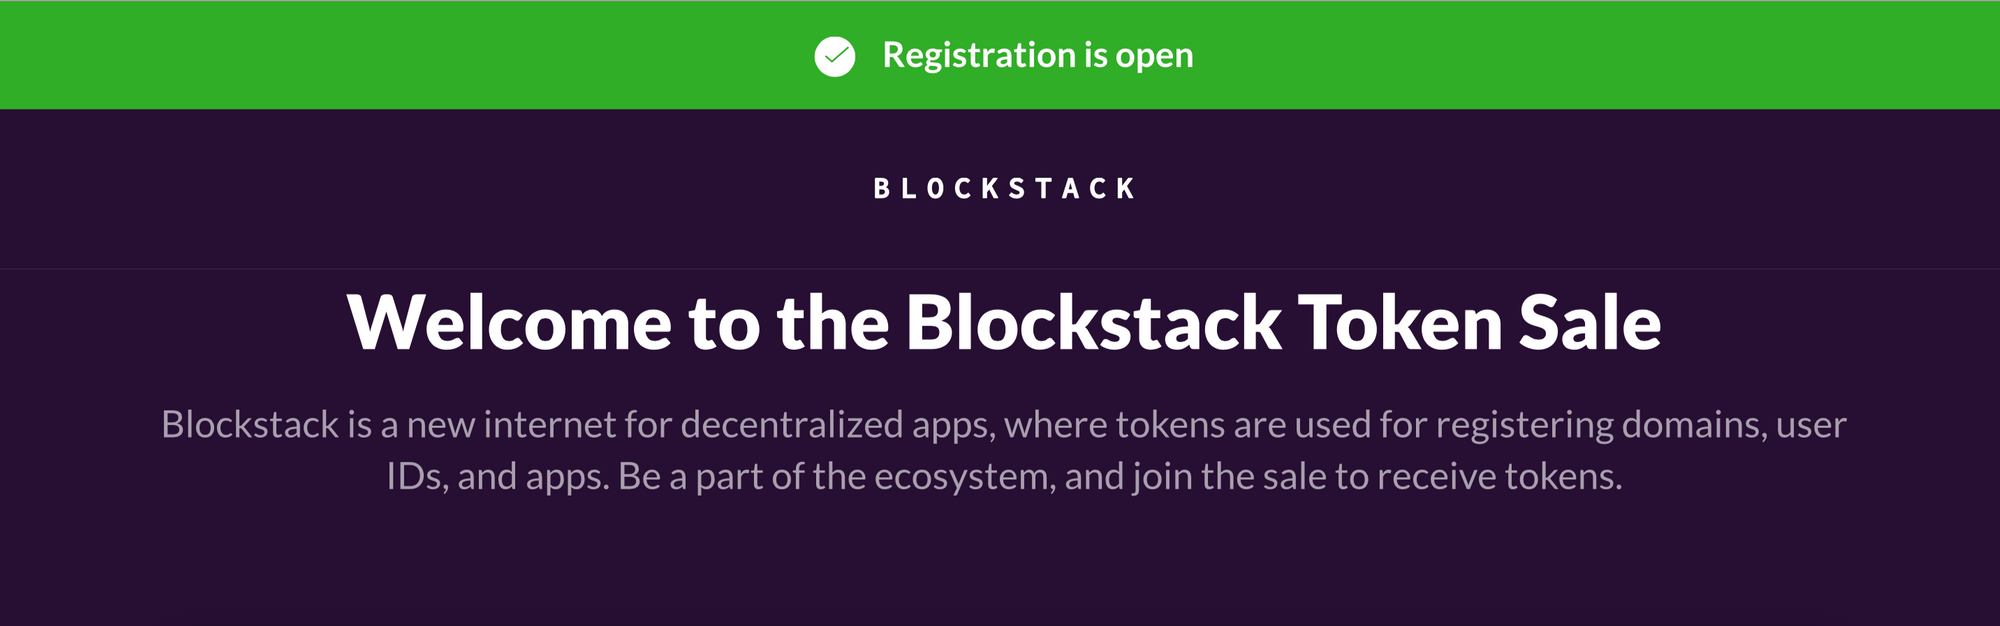 Proof of Humanity: a Deep Dive into the Blockstack Token Sale Registration App